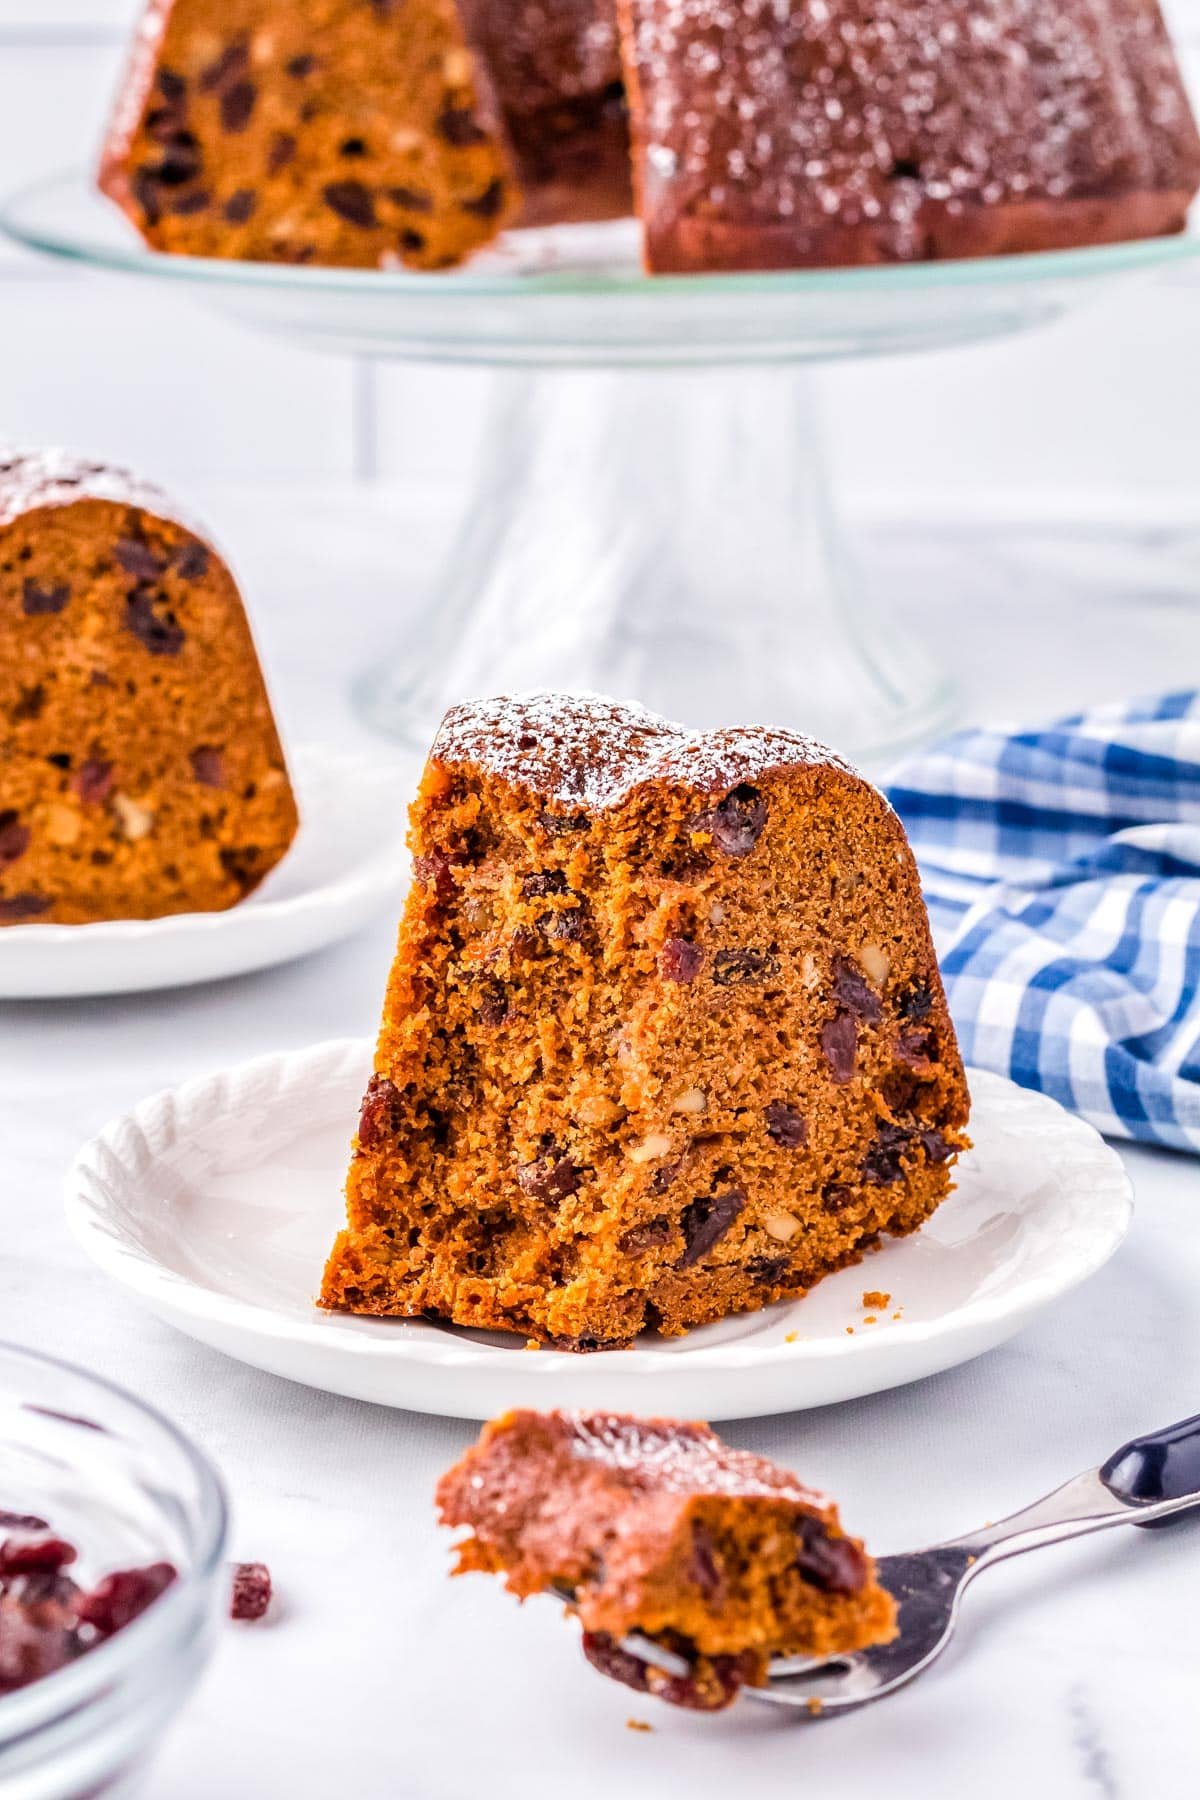 A slice of the Raisin Cake recipe on a white plate and cut into with a fork.